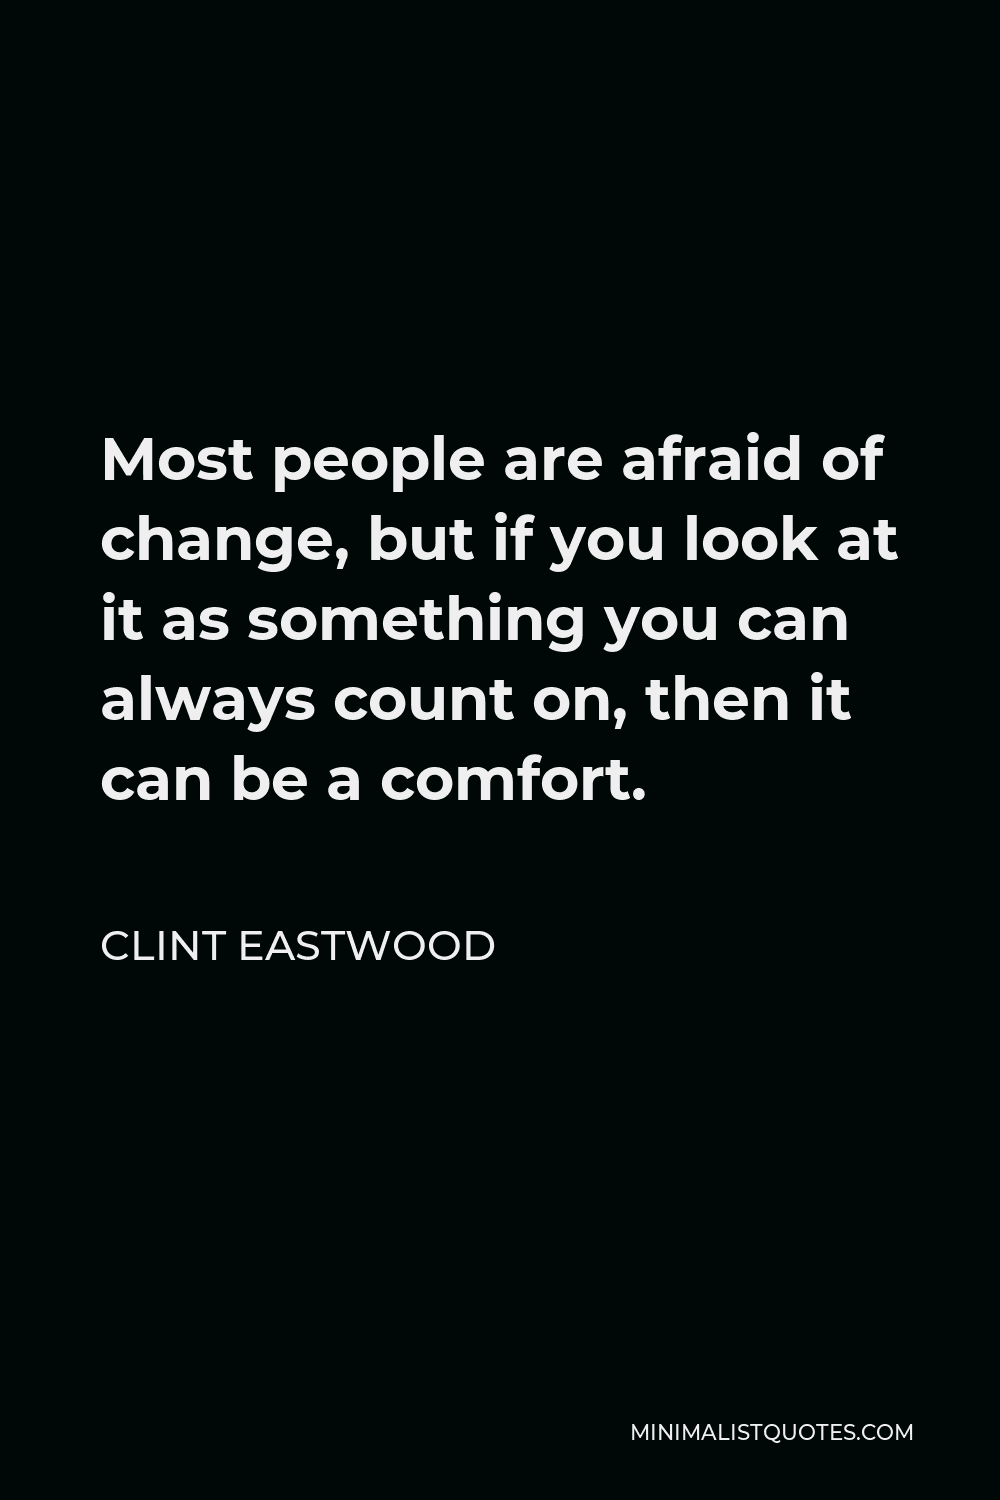 Clint Eastwood Quote - Most people are afraid of change, but if you look at it as something you can always count on, then it can be a comfort.